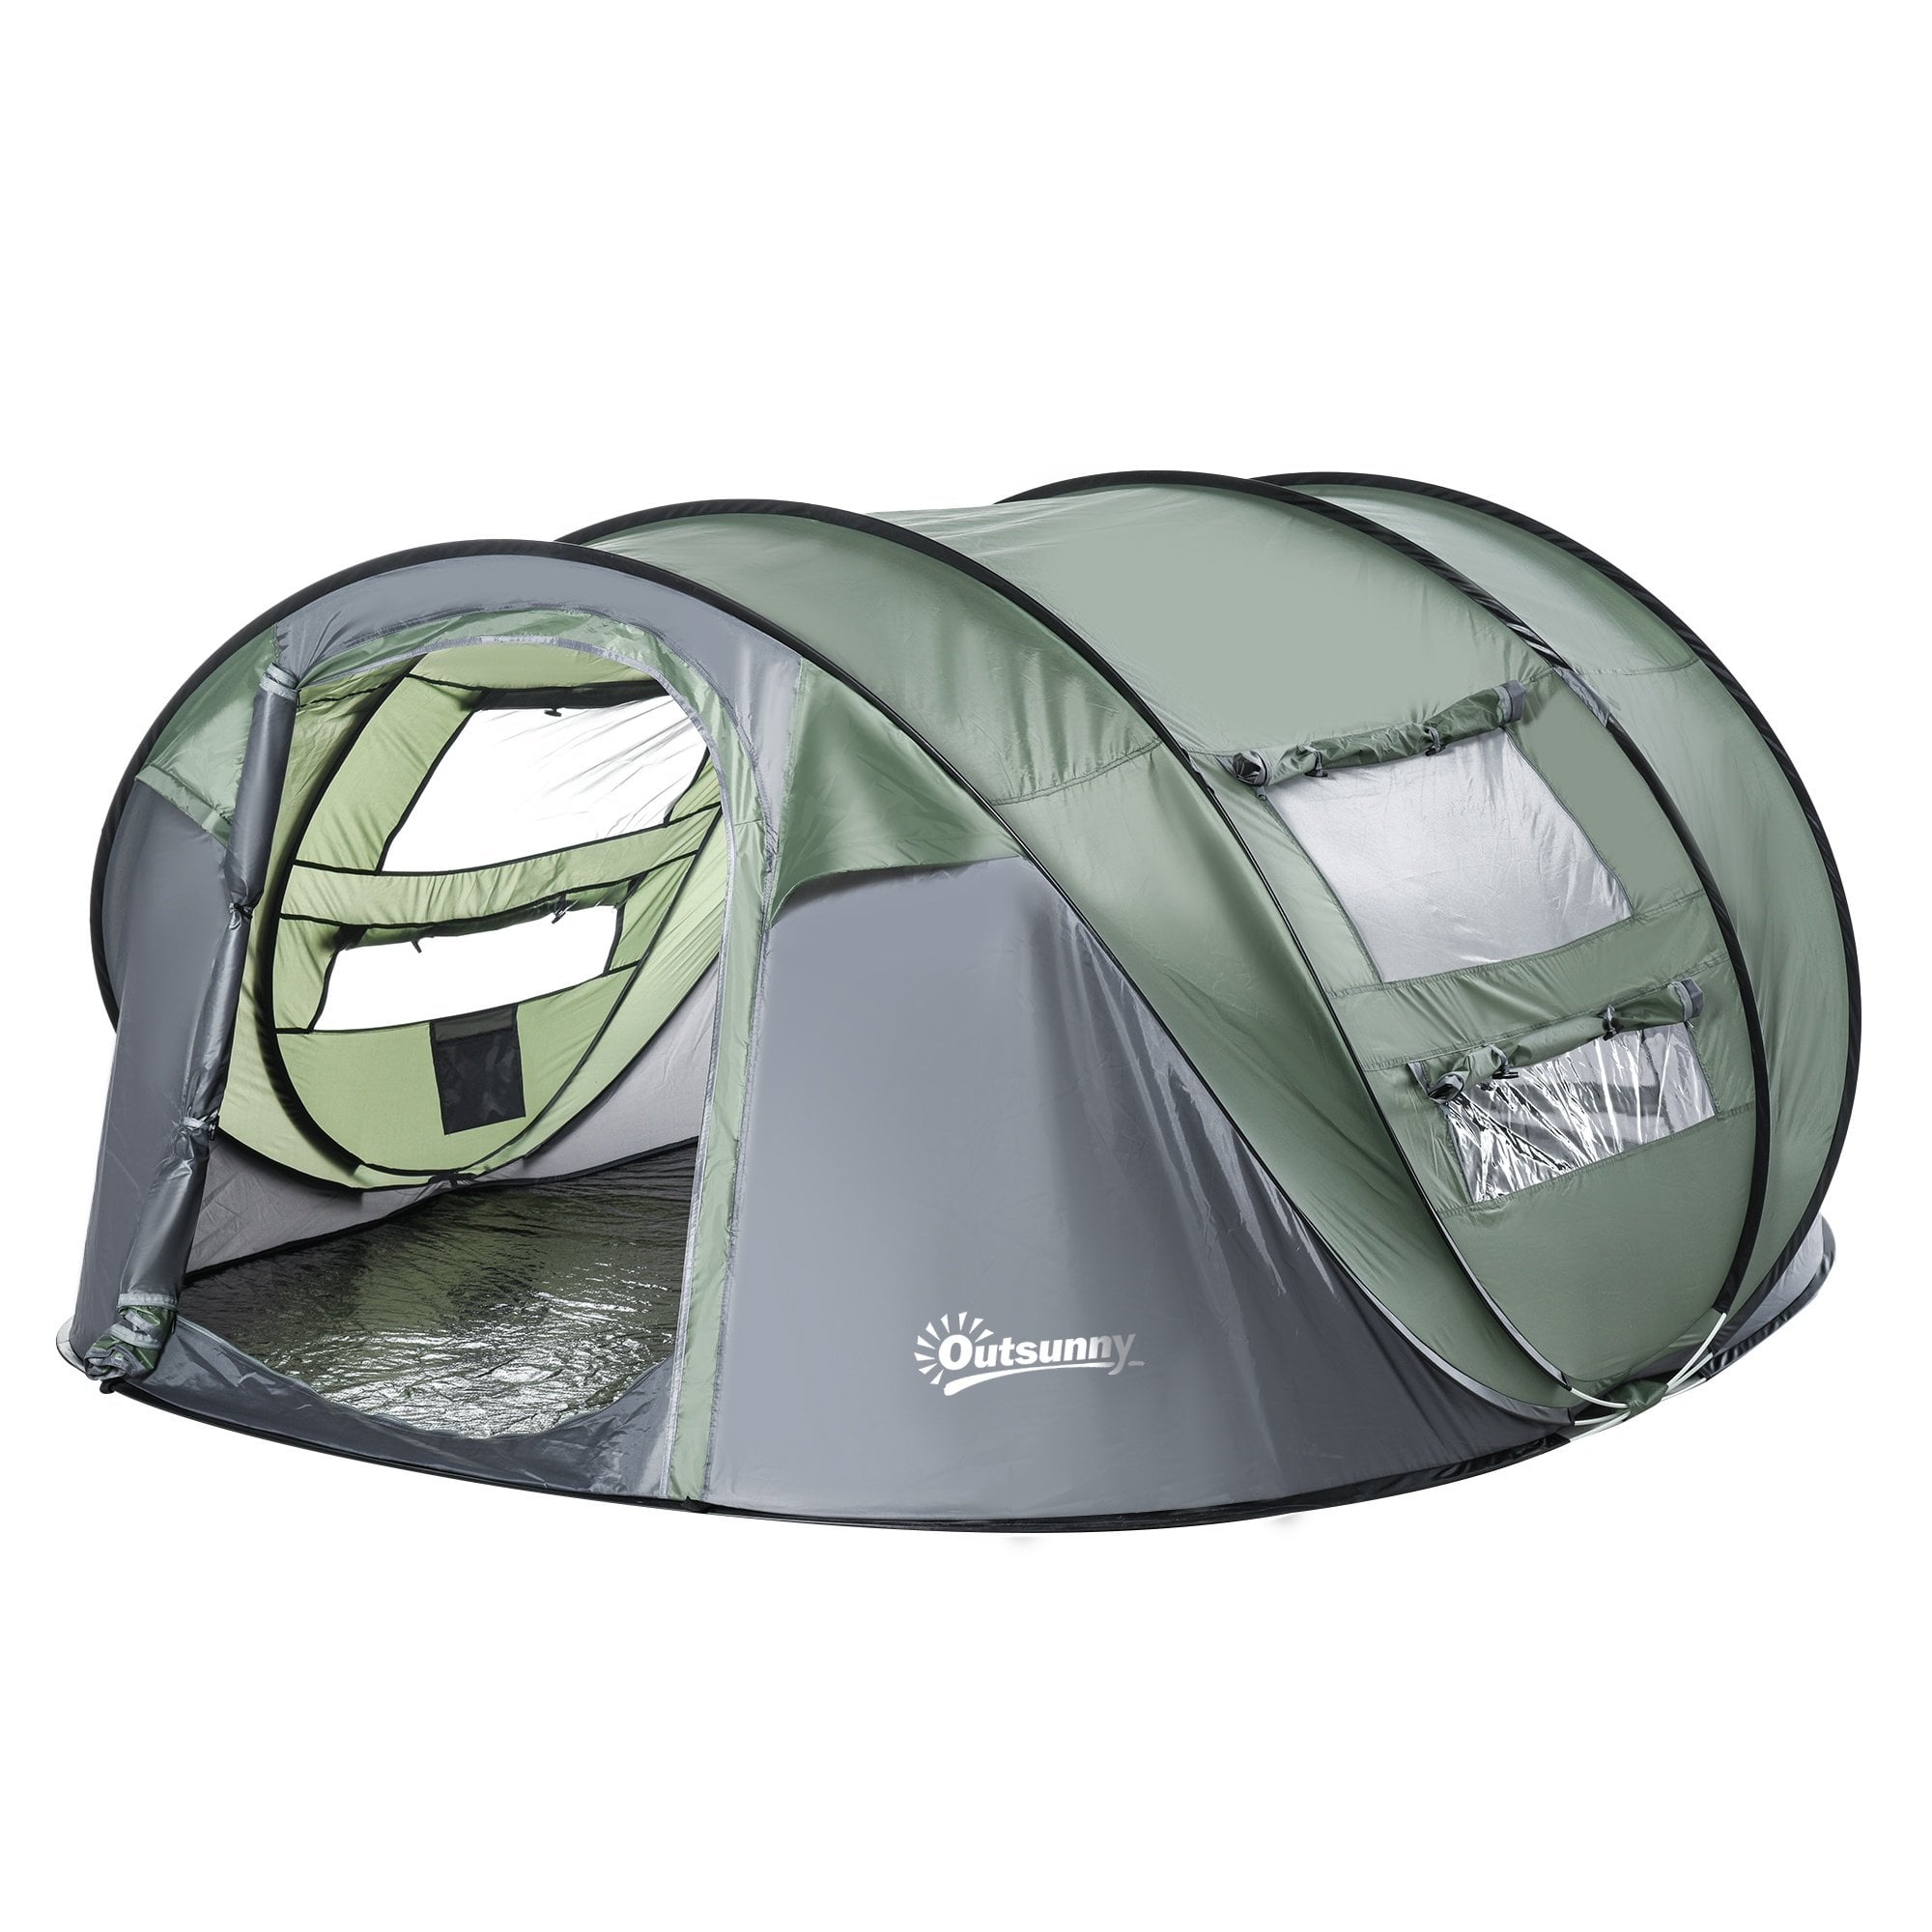 Outsunny 4-5 Person Family Pop-up Waterproof Camping Tent w/ 2 Mesh Windows & PVC Windows Portable Carry Bag  | TJ Hughes